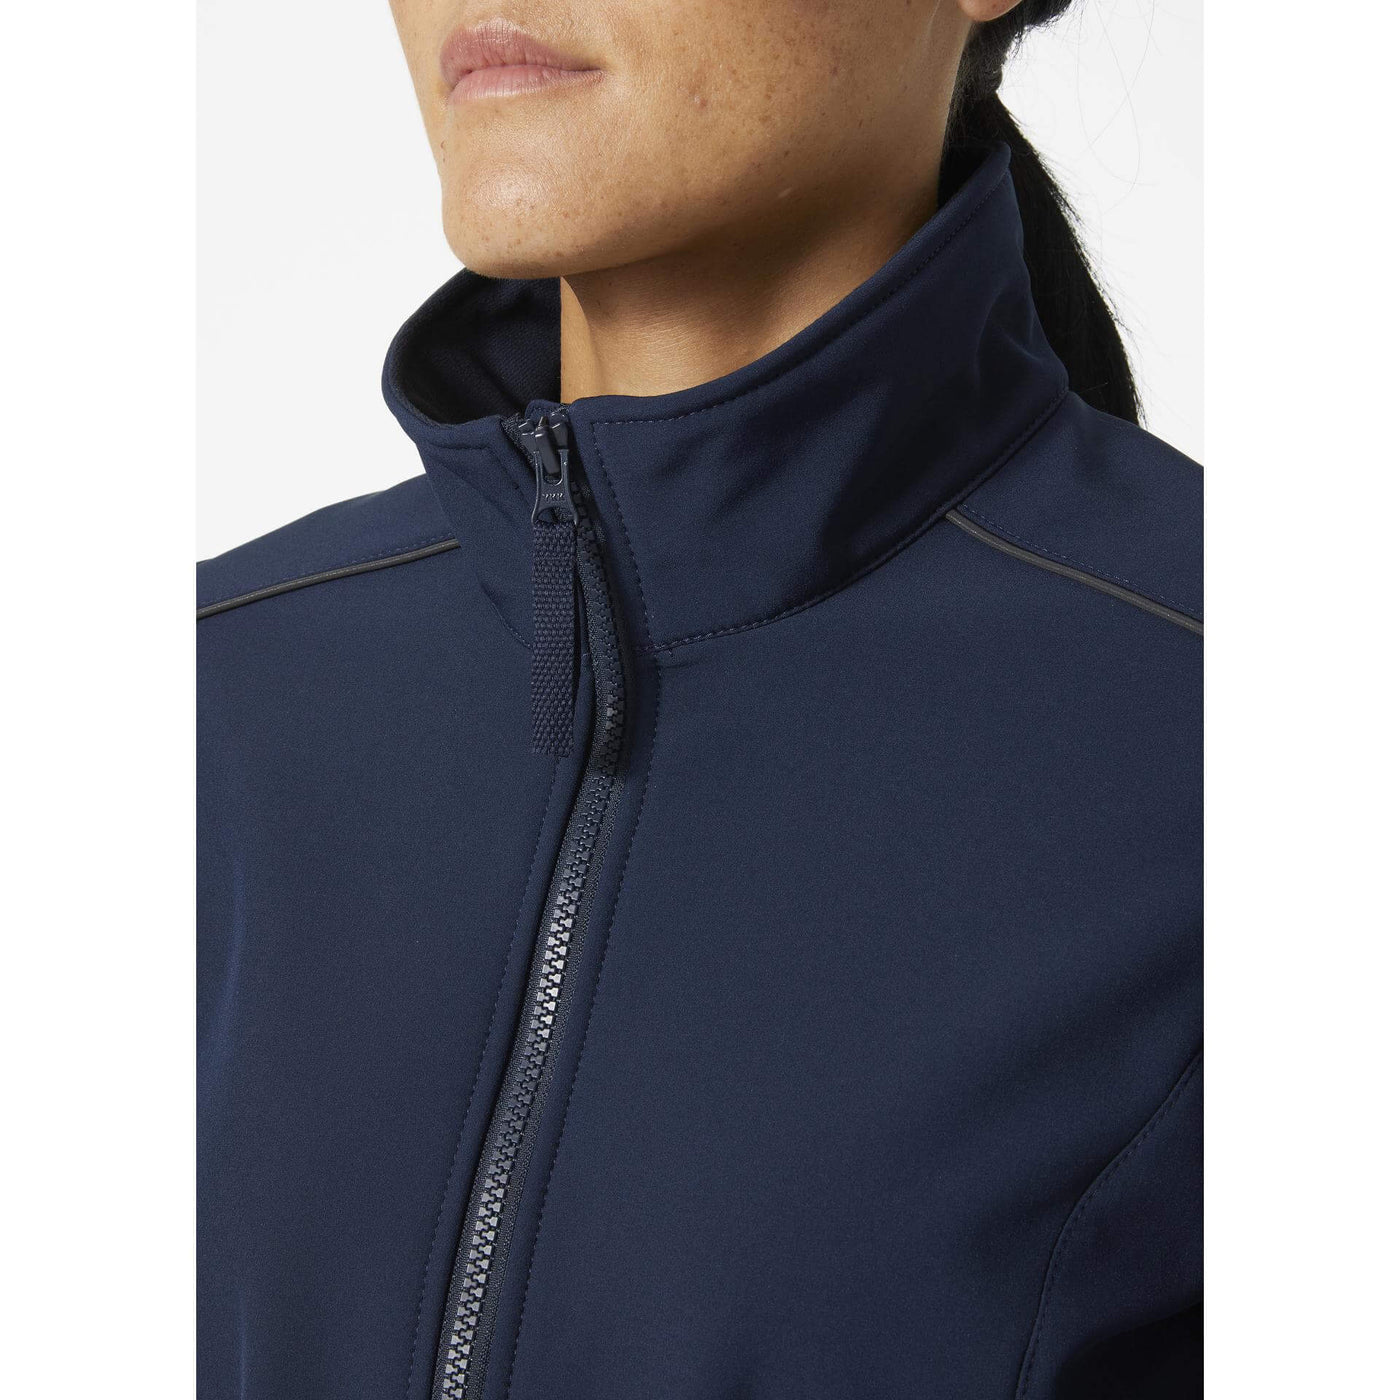 Helly Hansen Womens Manchester 2.0 Softshell Jacket Navy Feature 2#colour_navy